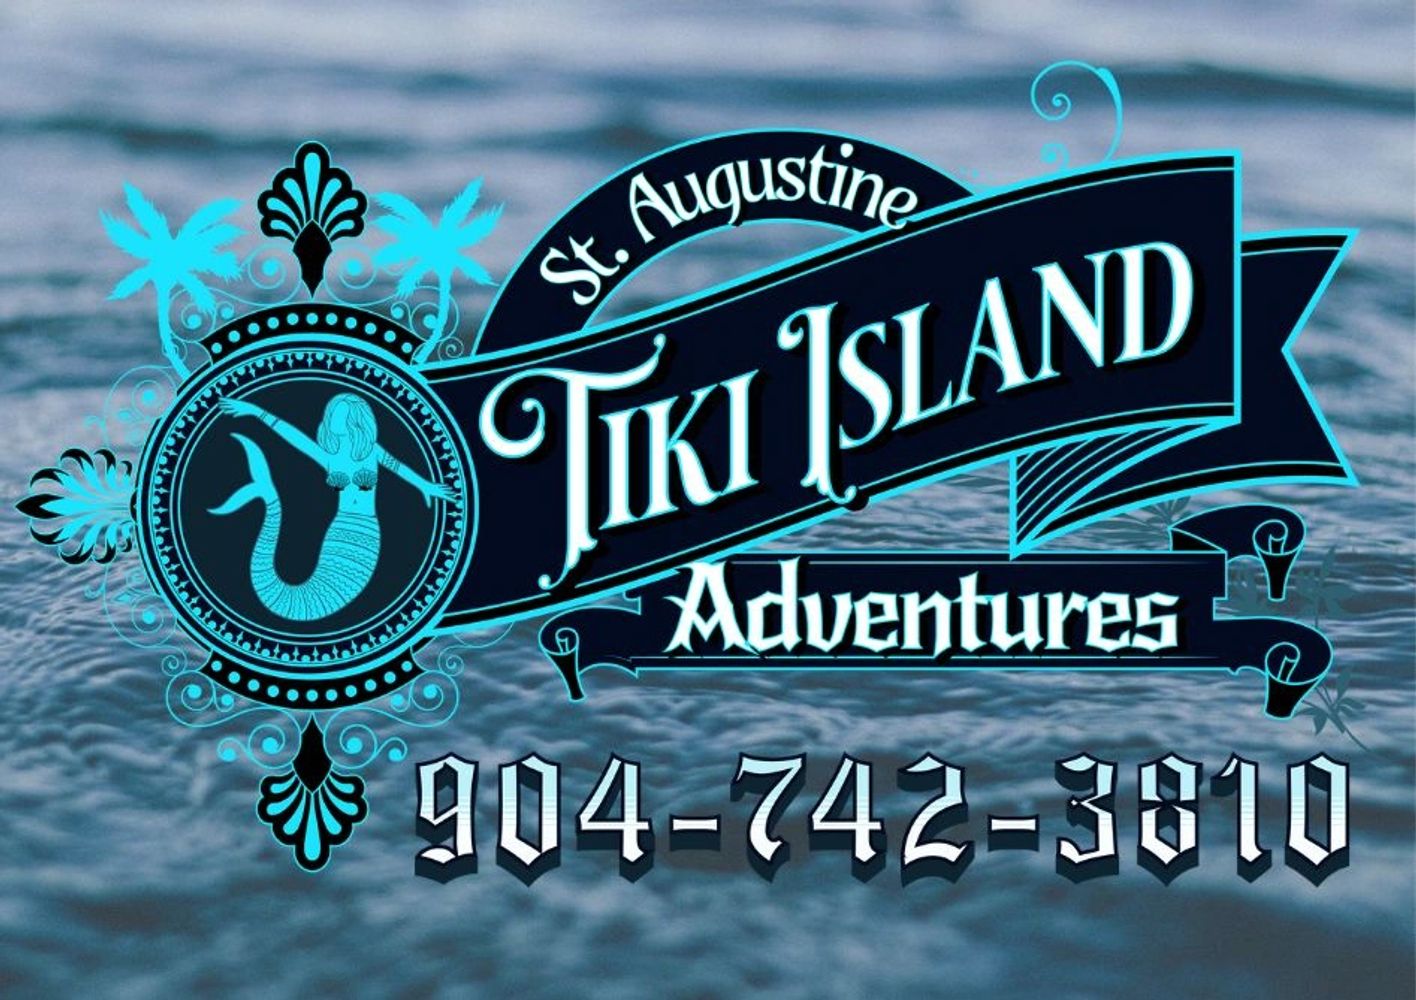 St. Augustine Boat tours by Tiki Island Adventures.